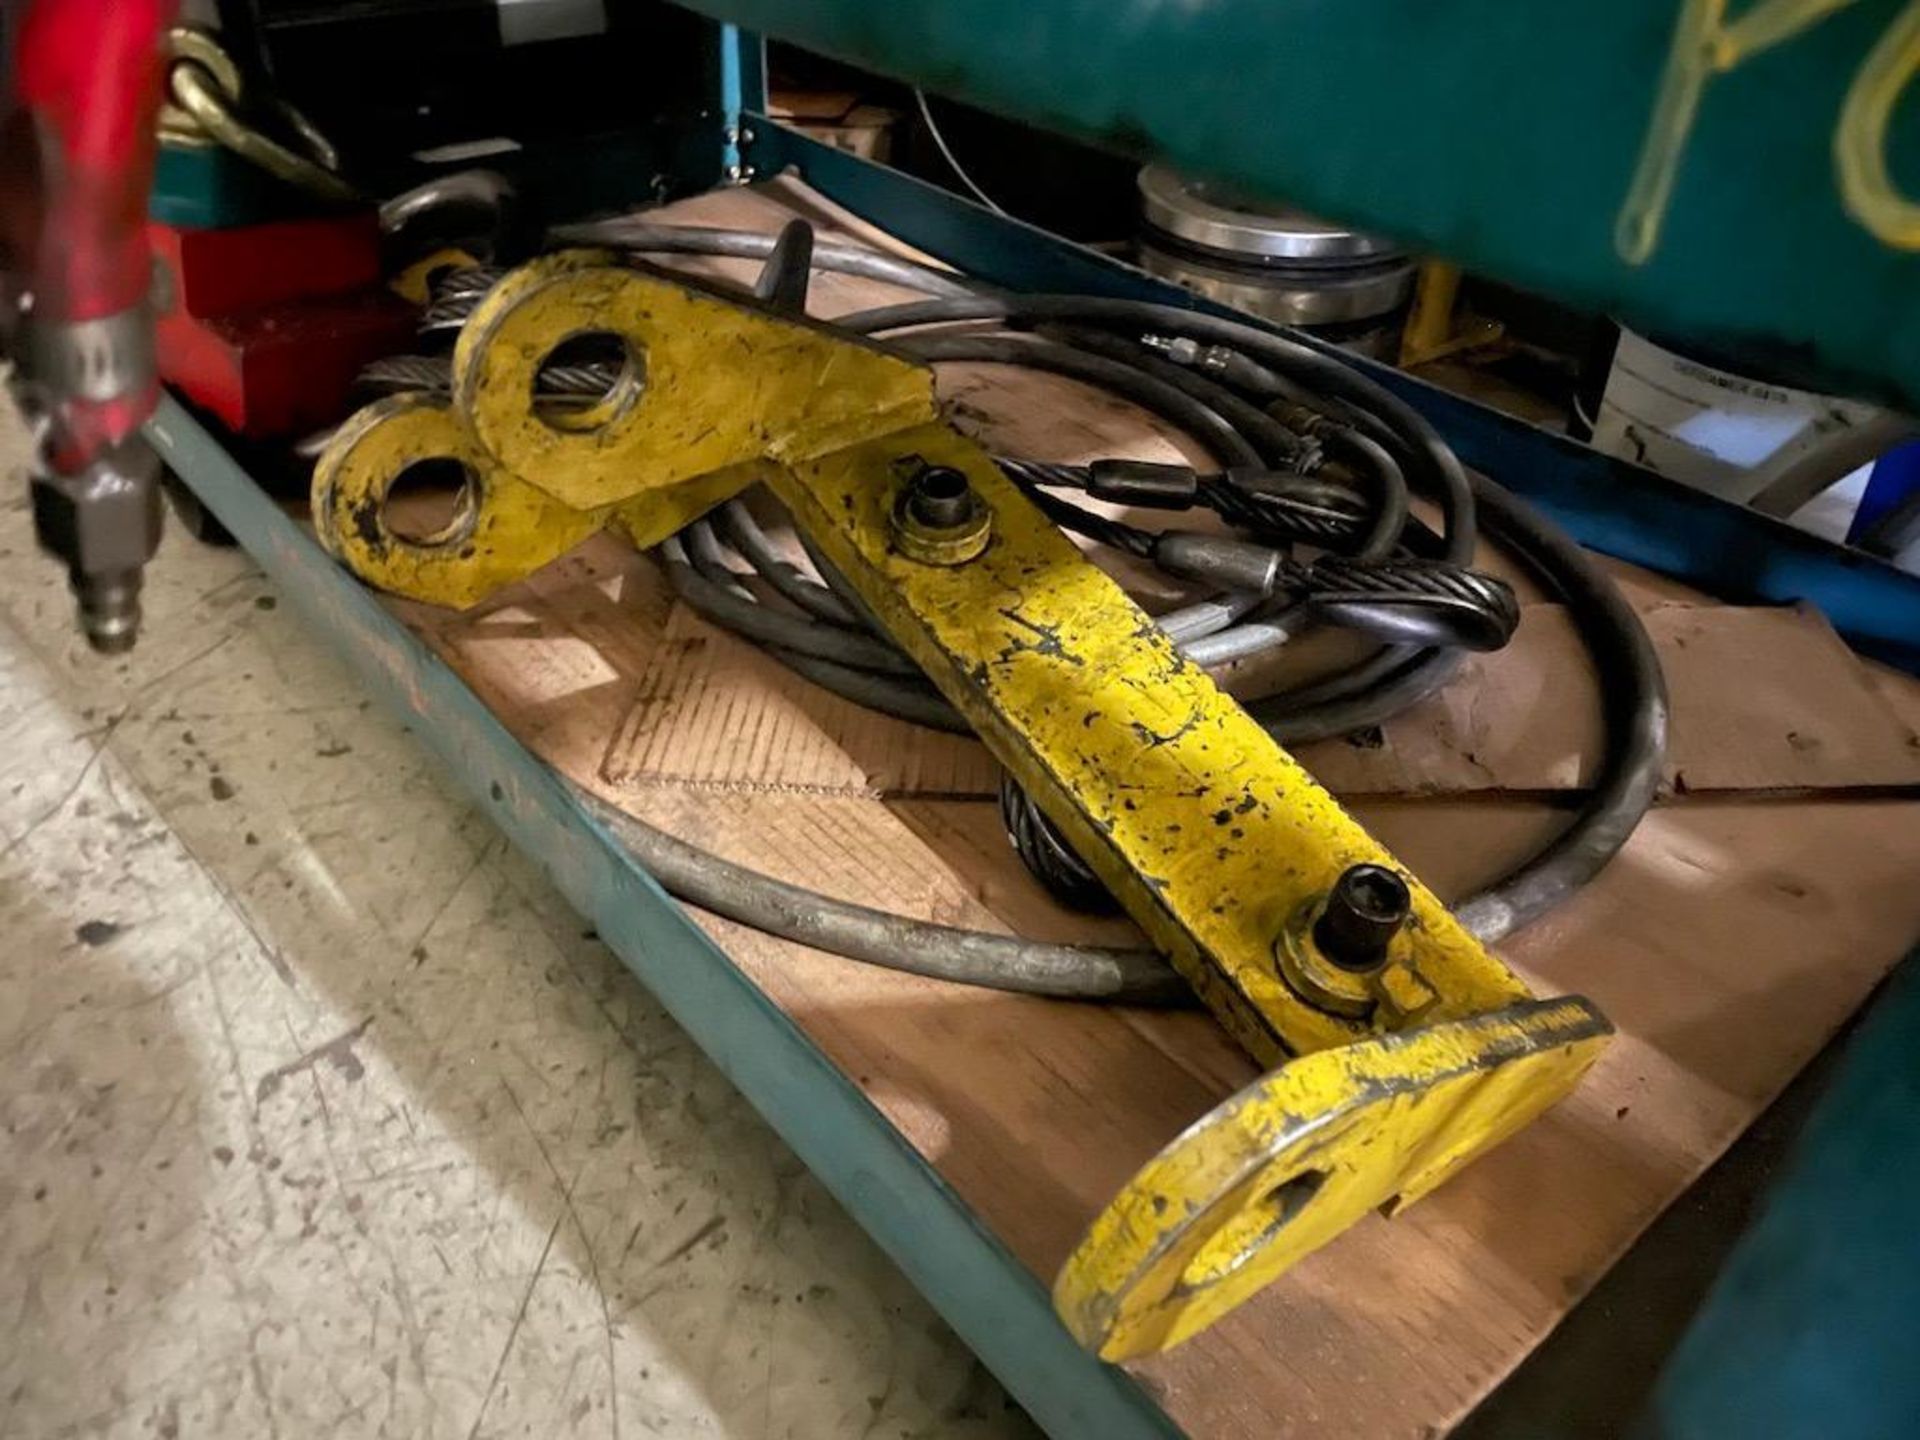 LOT REMAINING CONTENTS OF MAINTENANCE CAGE, MAG DRILL, 2 PORTABLE CARTS W JACKS, TOOLS, CONTENTS, - Image 5 of 16